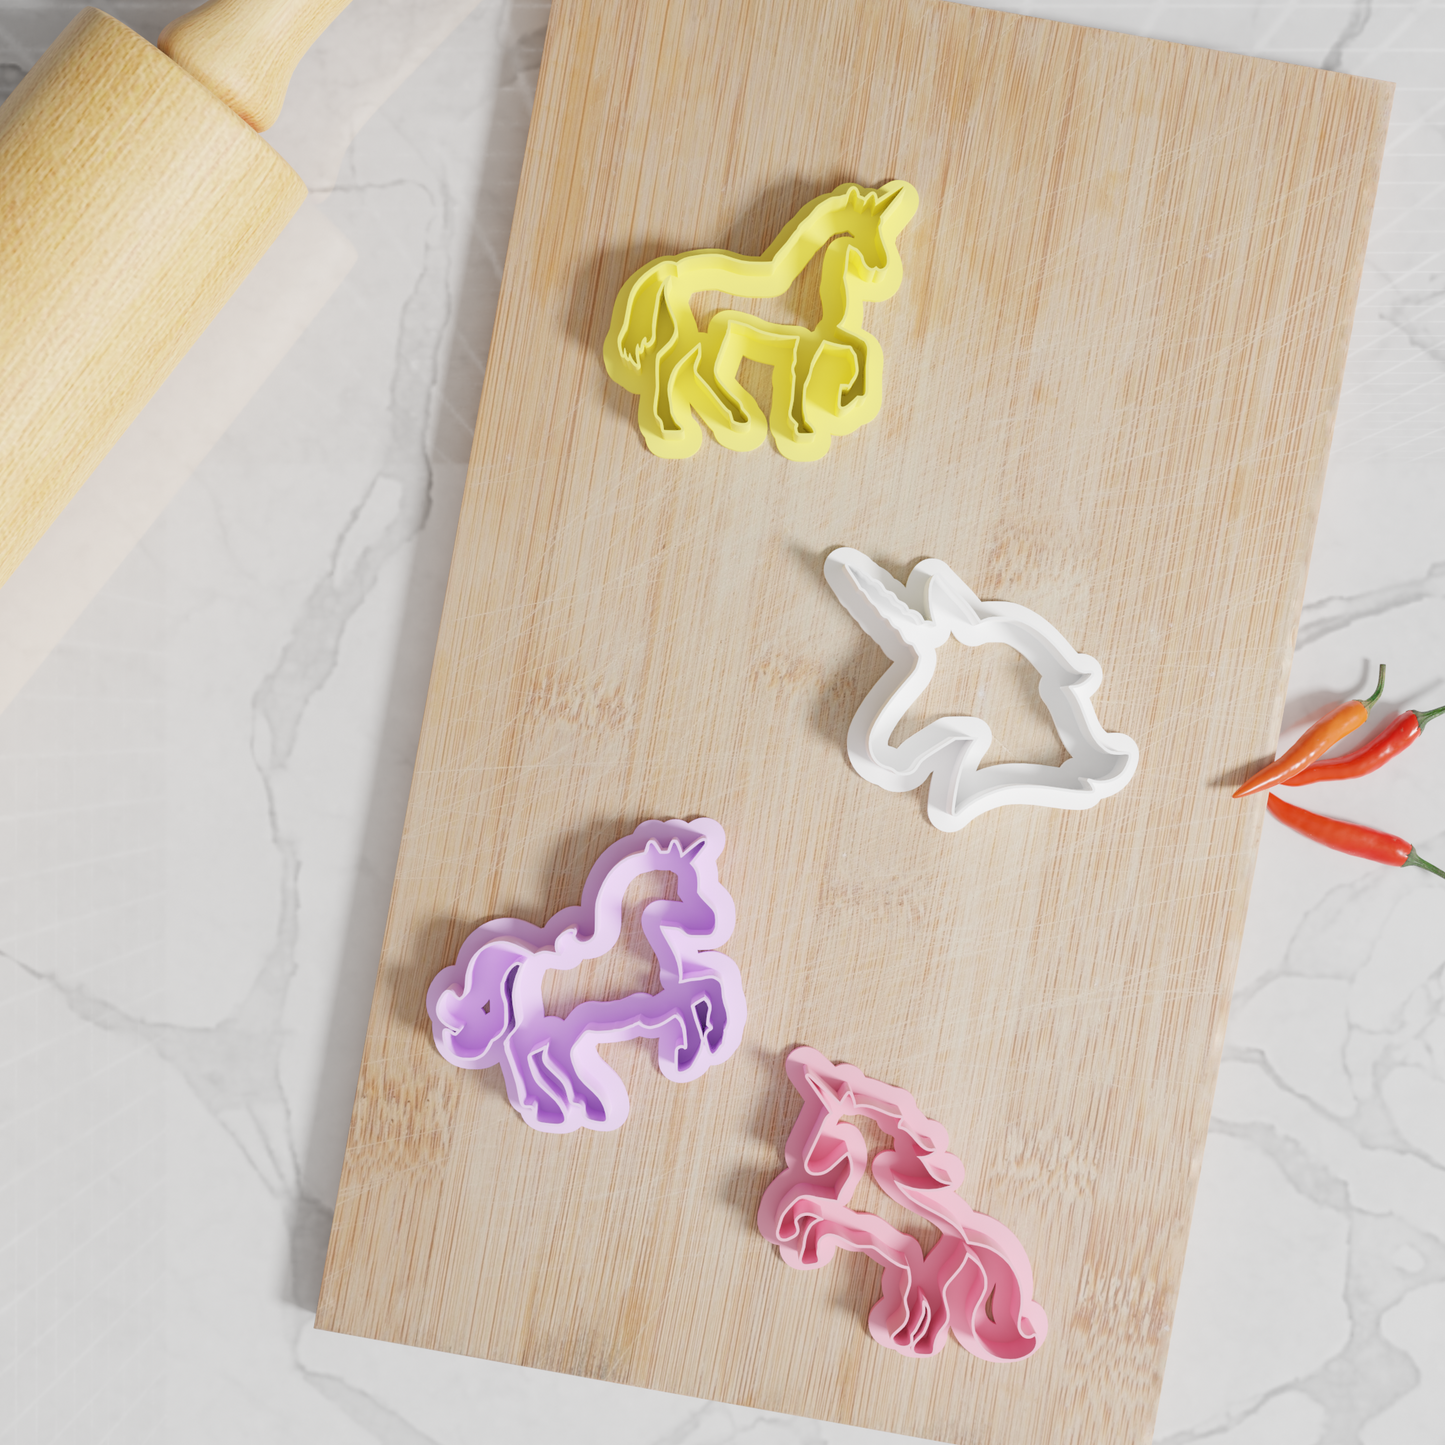 Unicorn Cookie Cutters. Set of 4 Premium Unicorn Cookie Cutters. Four Sizes, Rainbow Of Colors!